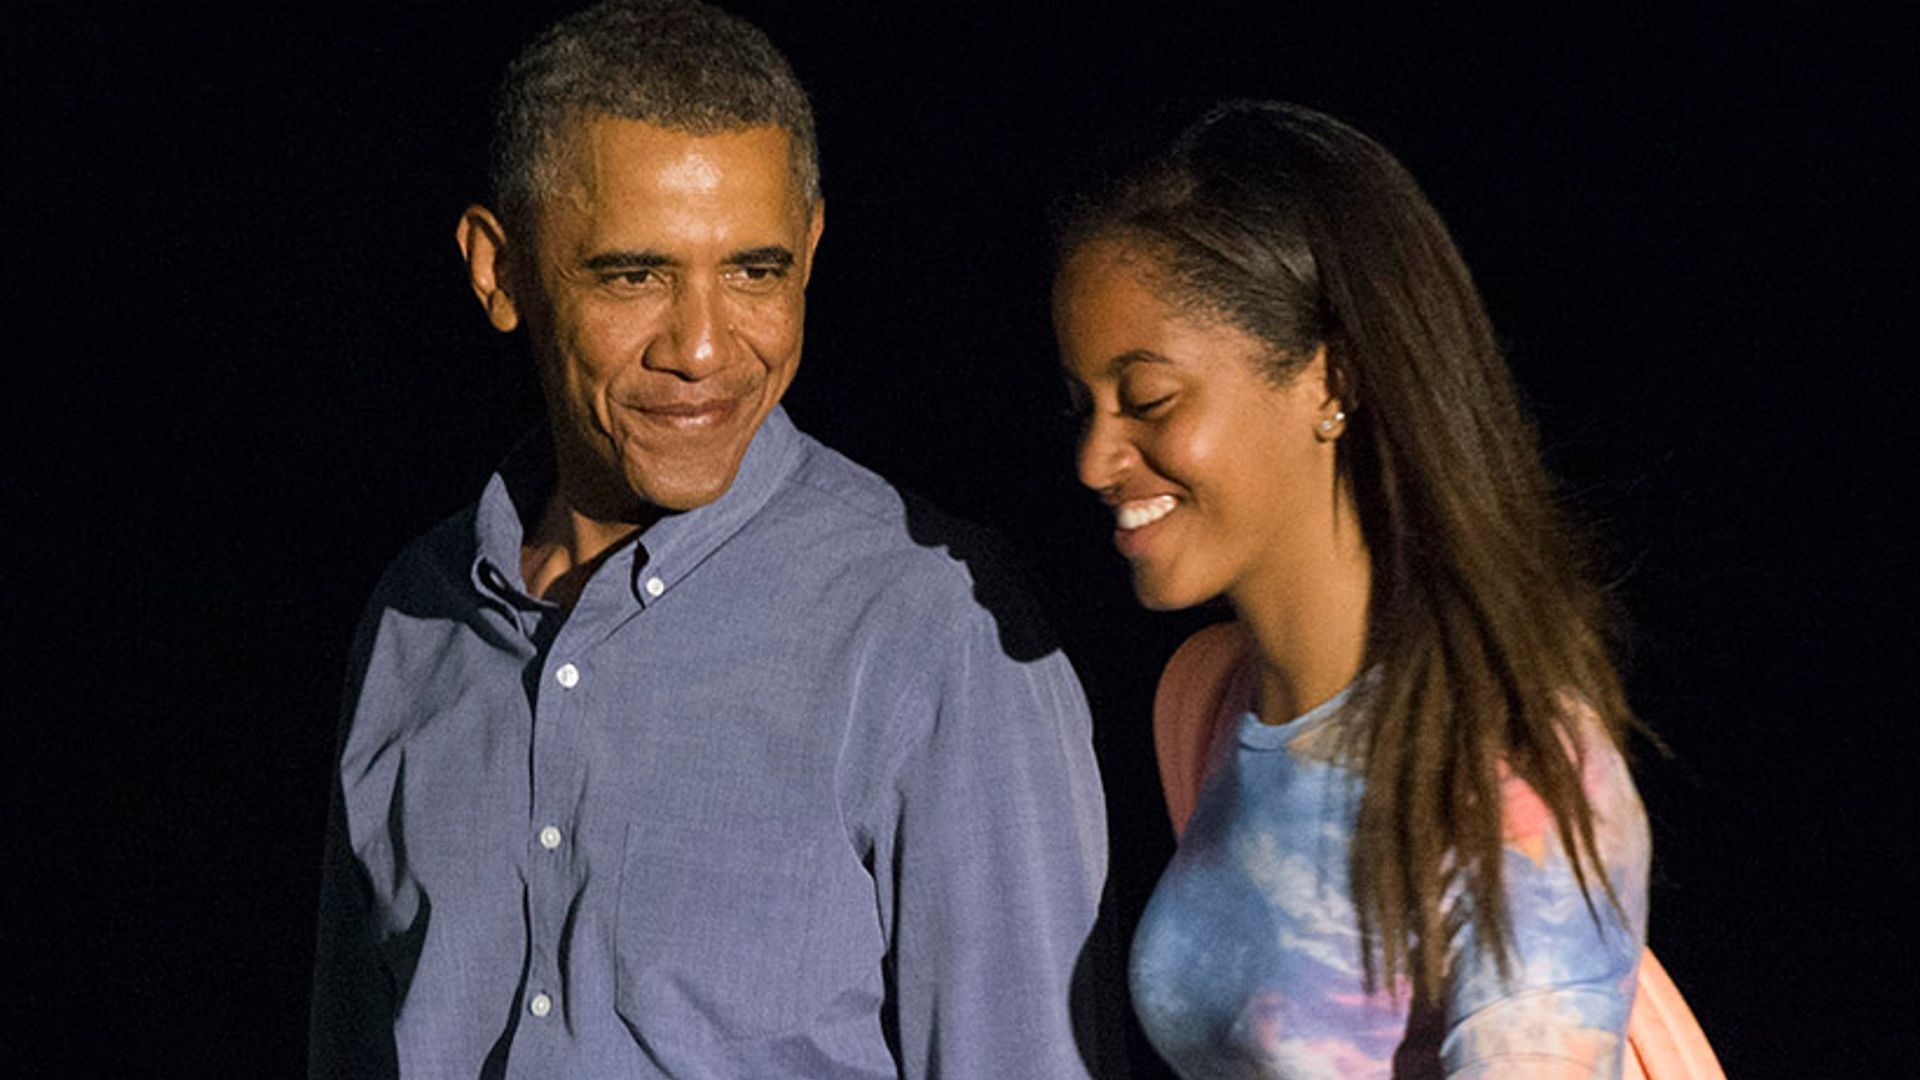 Malia Obama: As she turns 18 see how Barack Obama's daughter prepares to strike out on her own